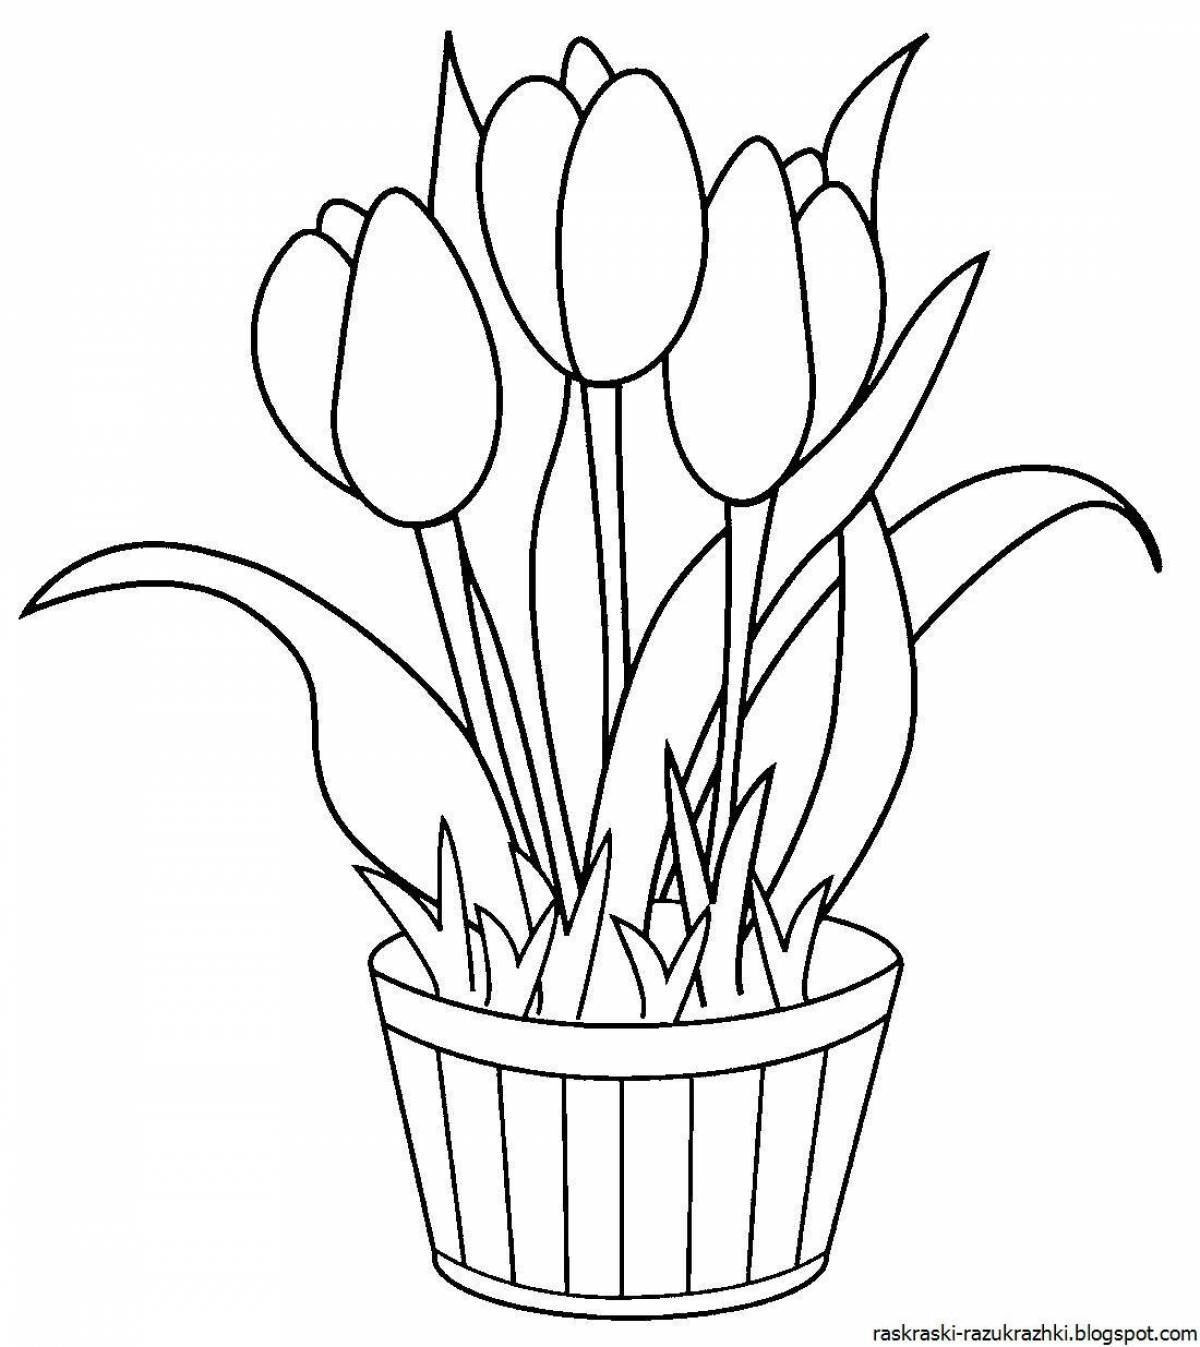 Fabulous flower coloring pages for 6-7 year olds